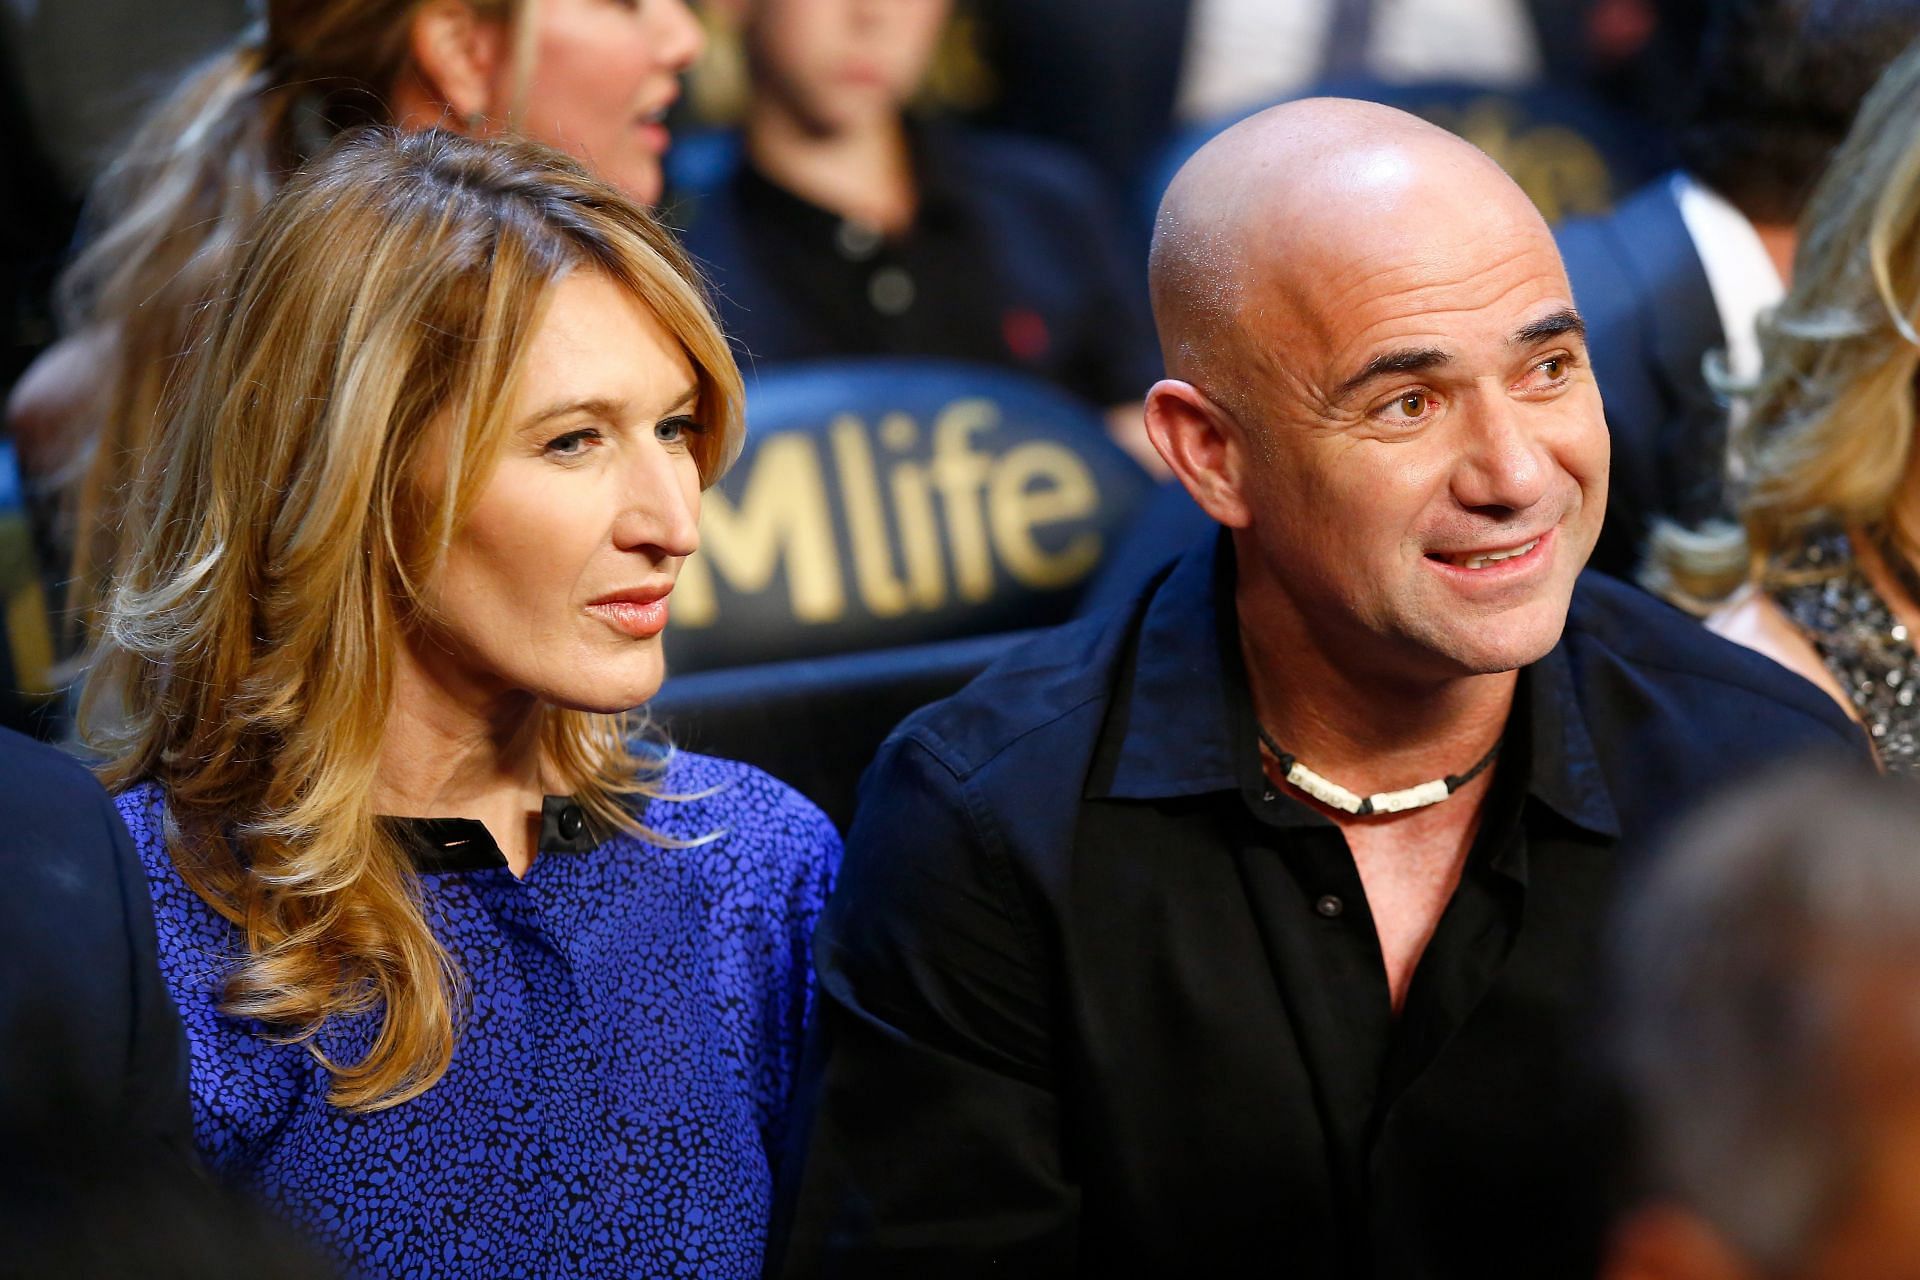 Steffi Graf and Andre Agassi in 2015